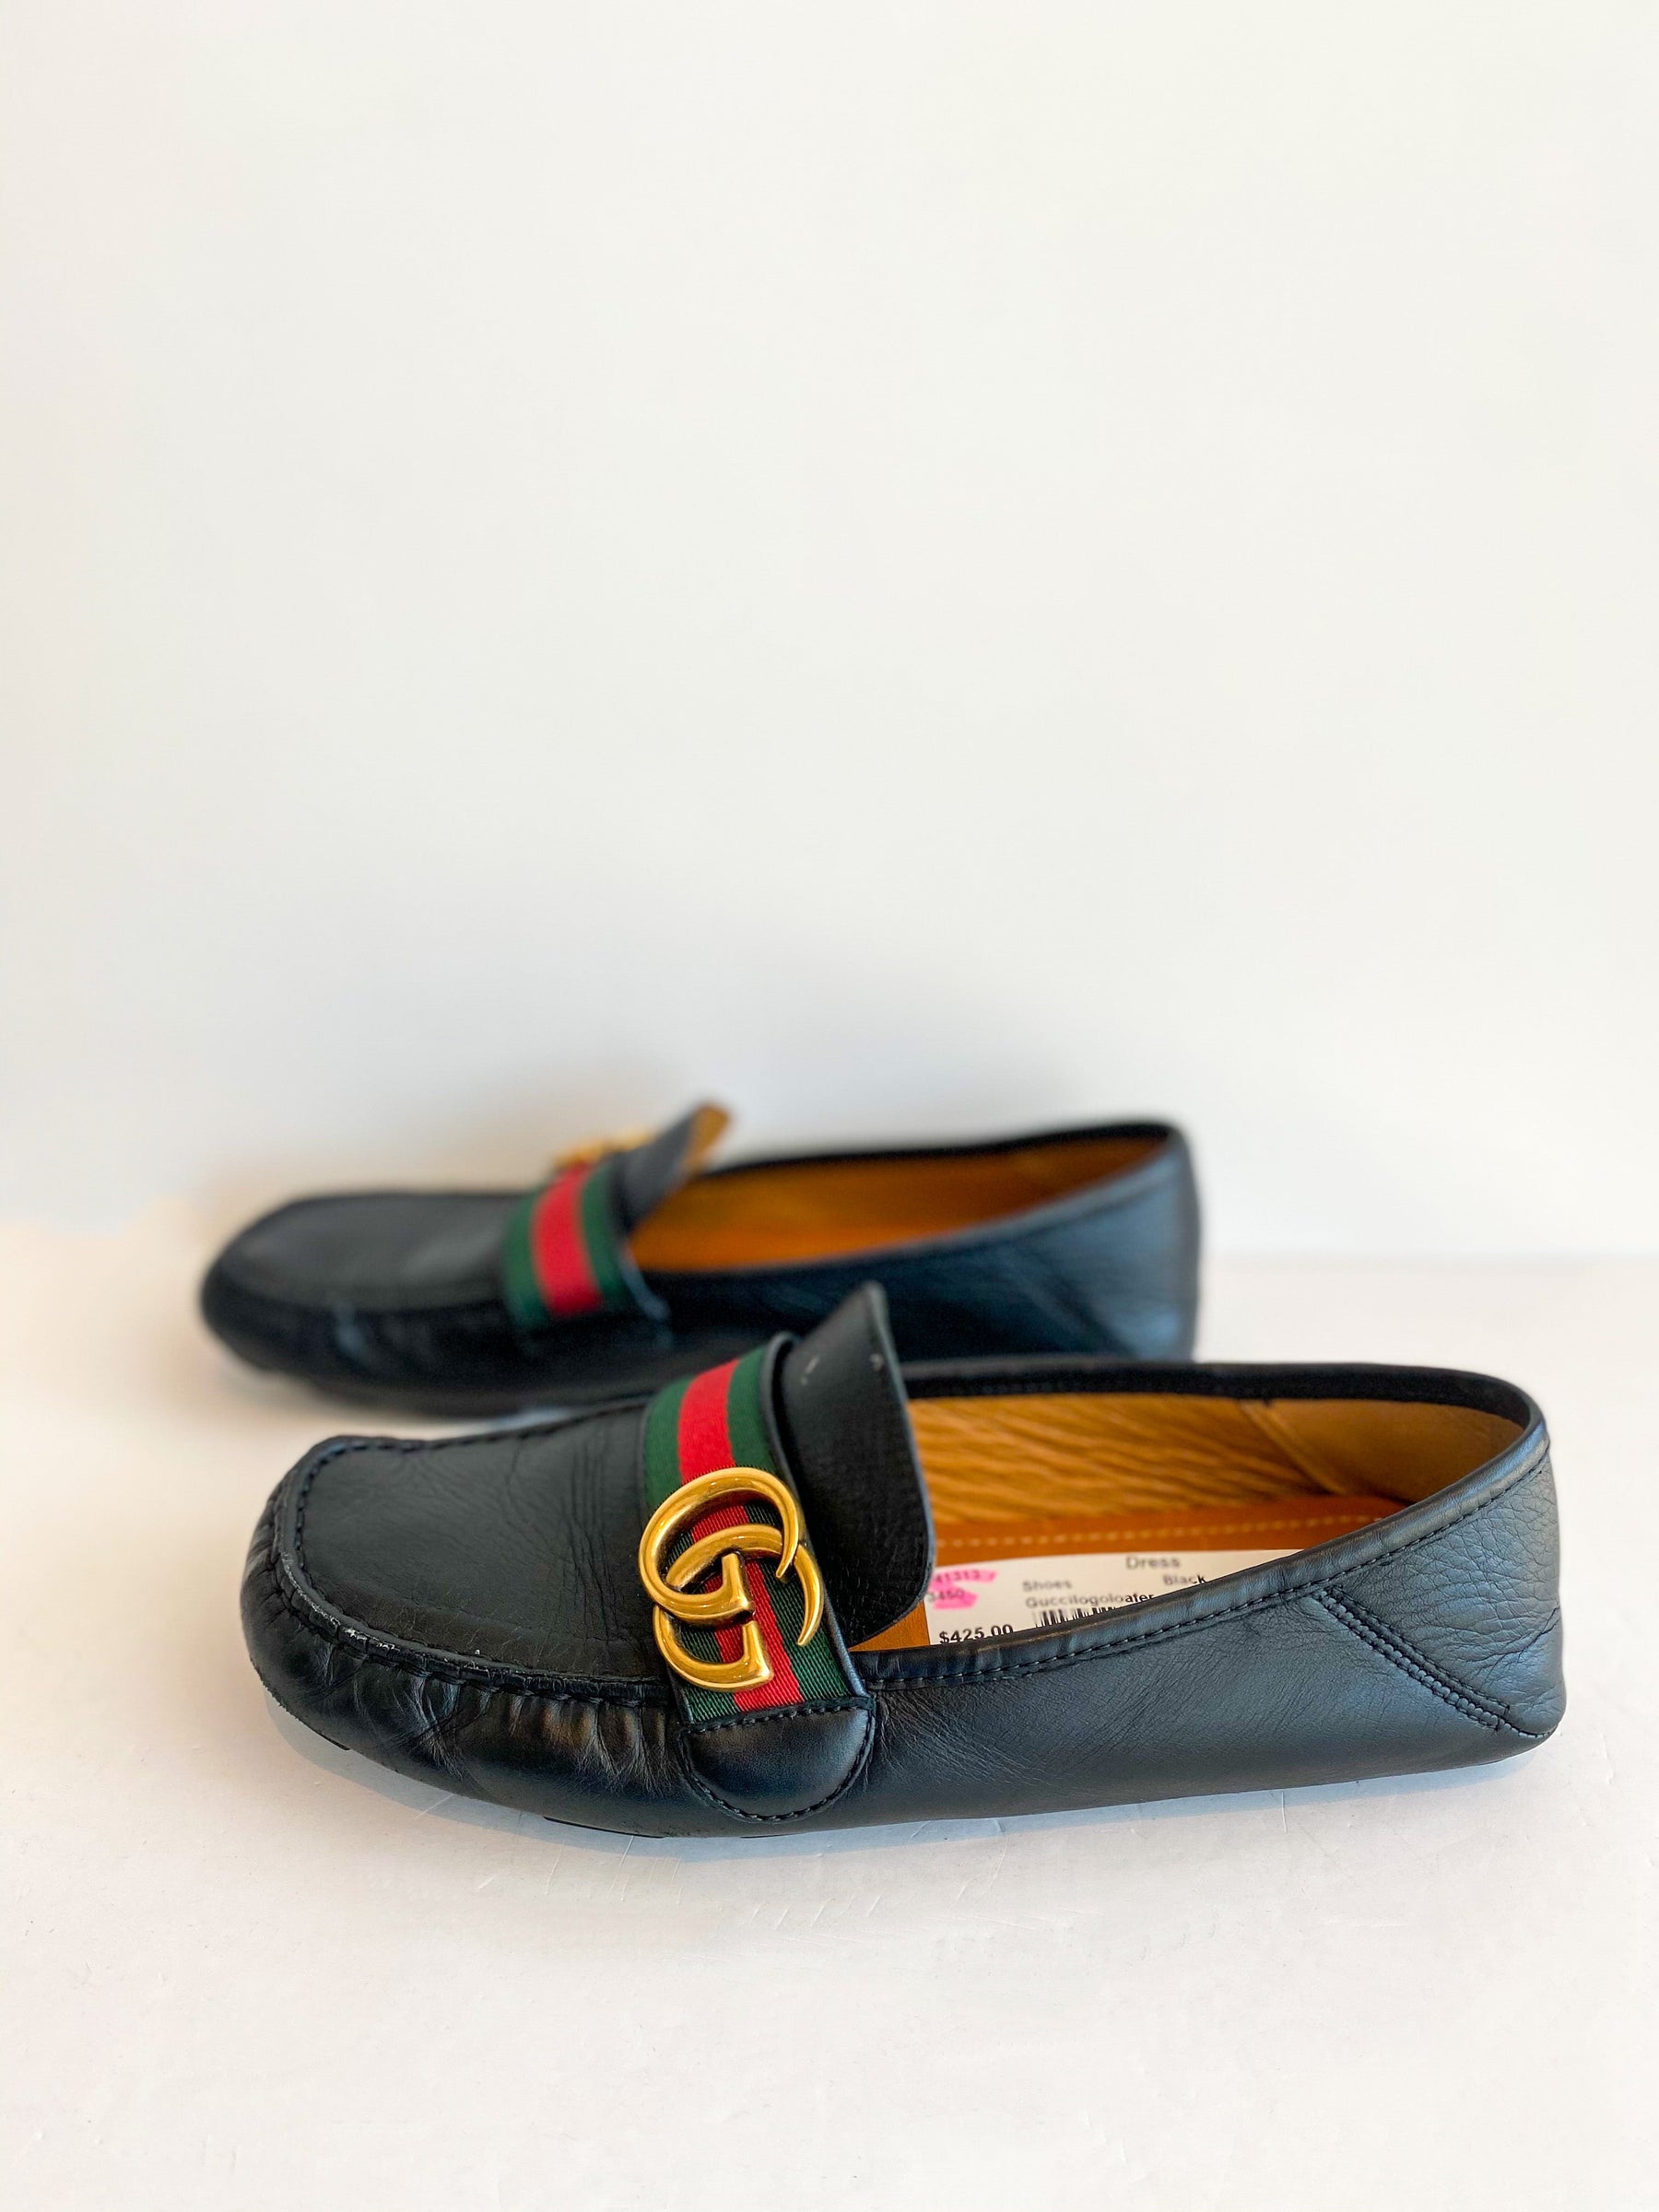 Gucci Logo Loafers Leather Black Gold Red Green Stripe Side of Shoes